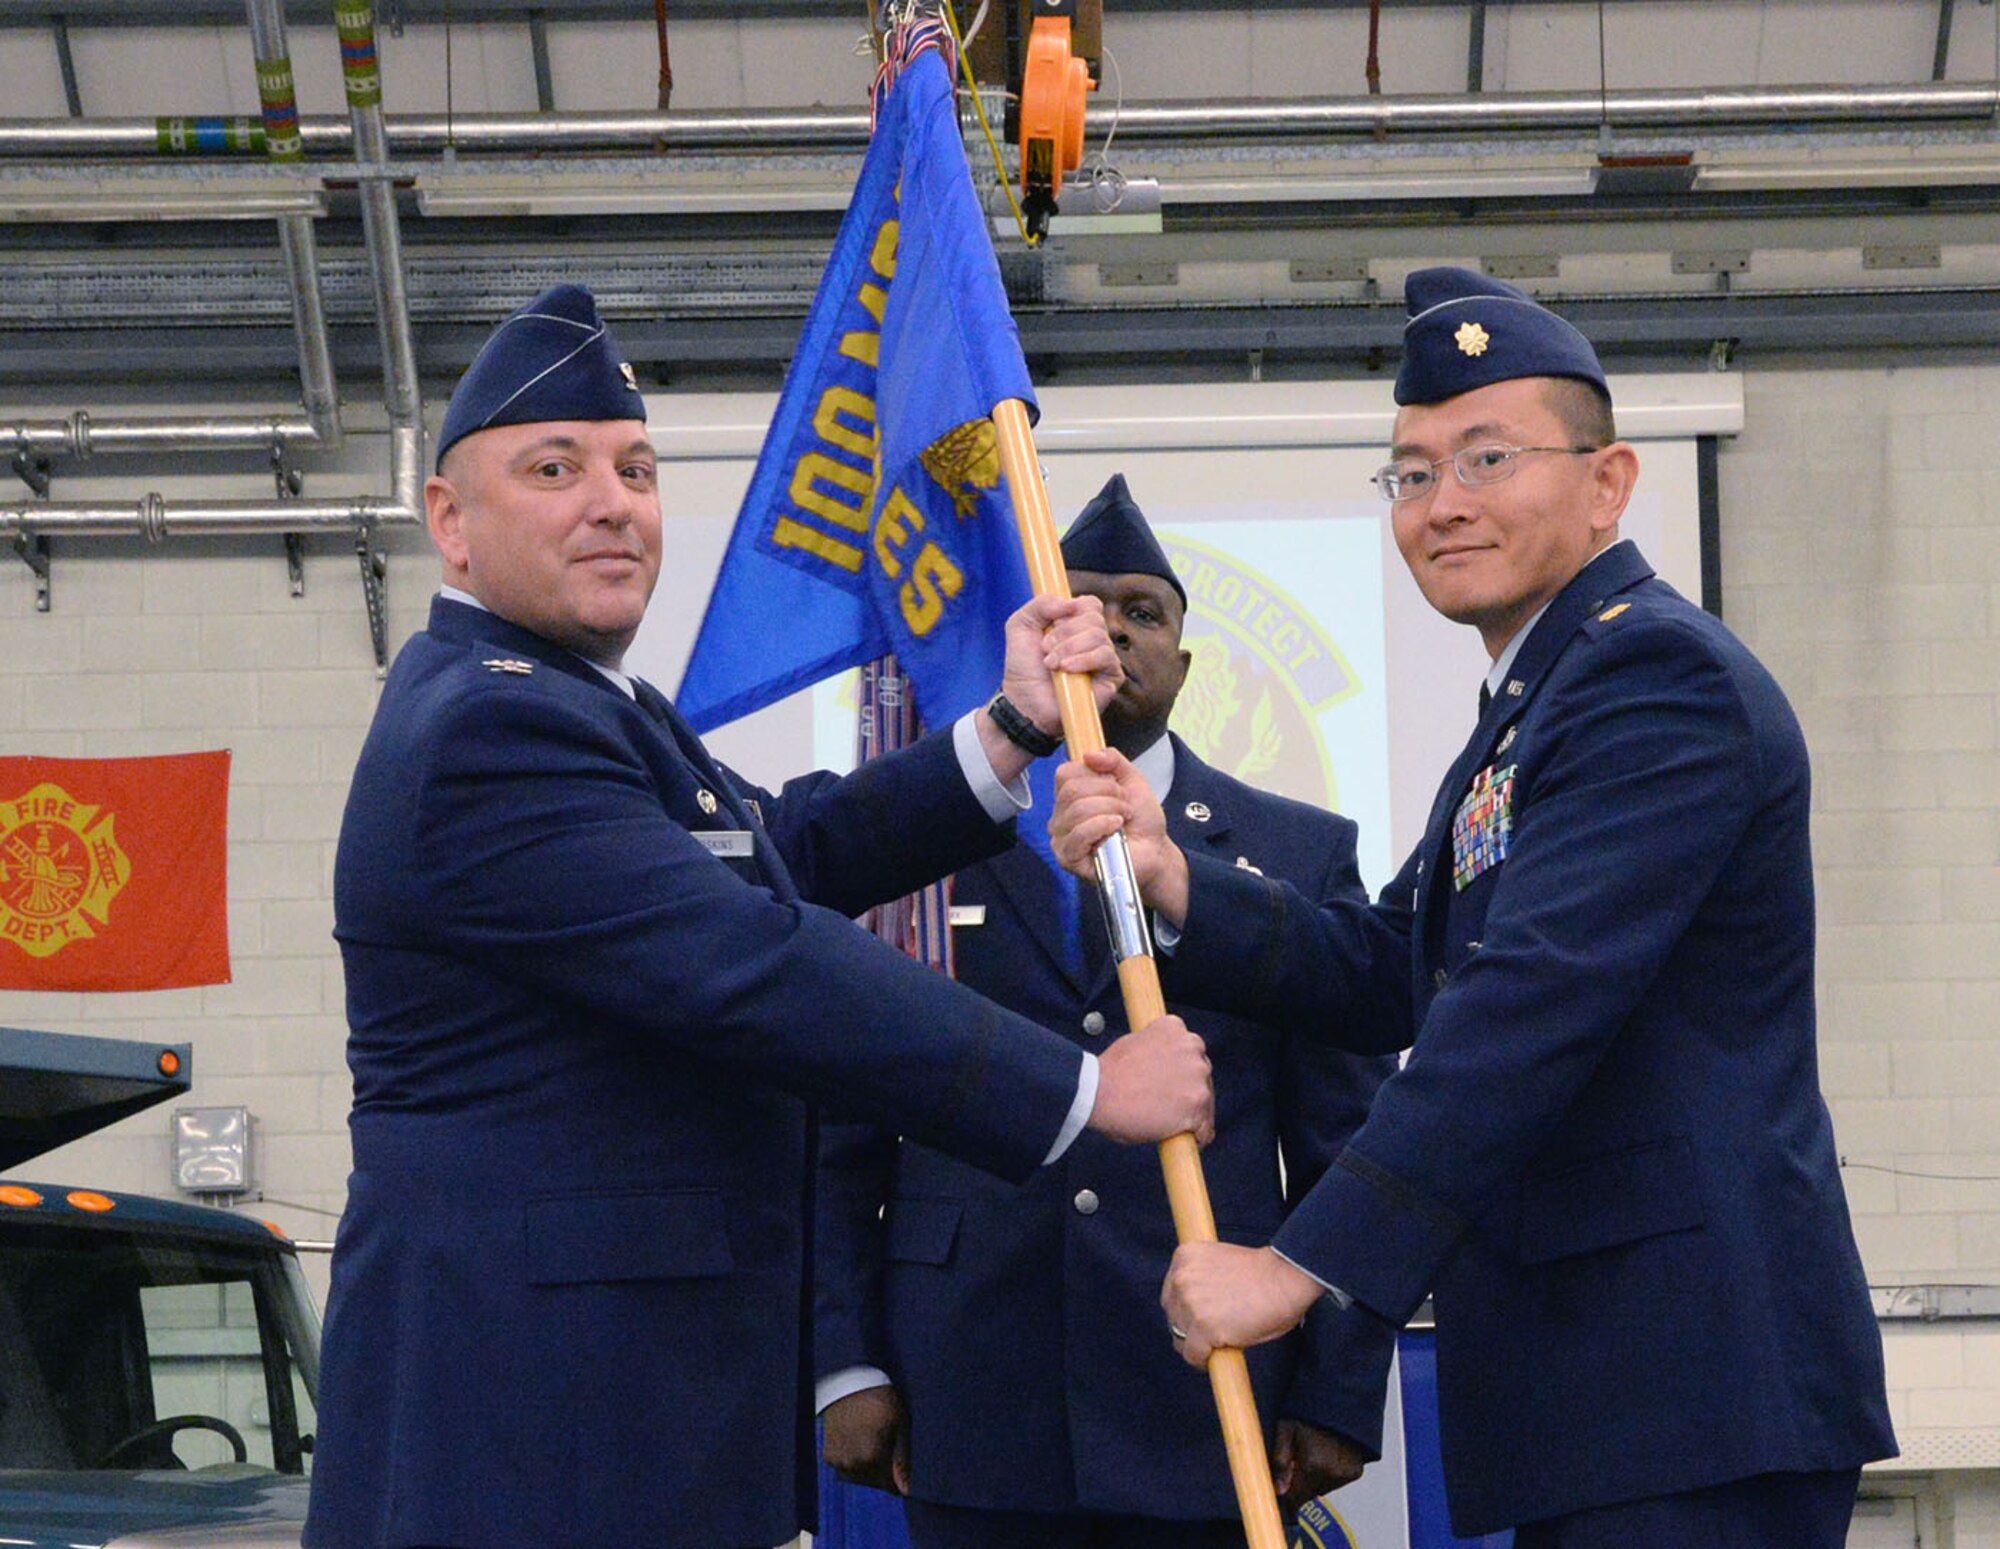 U.S. Air Force Col. Robert Hoskins, left, 100th Mission Support Group commander, passes the guidon to U.S. Air Force Maj. Robert Liu, new 100th Civil Engineer Squadron commander, June 6, 2017, during a change of command ceremony on RAF Mildenhall, England. The ceremony is a time-honored tradition in which one officer relinquishes command and passes it to another. (U.S. Air Force photo by Karen Abeyasekere)